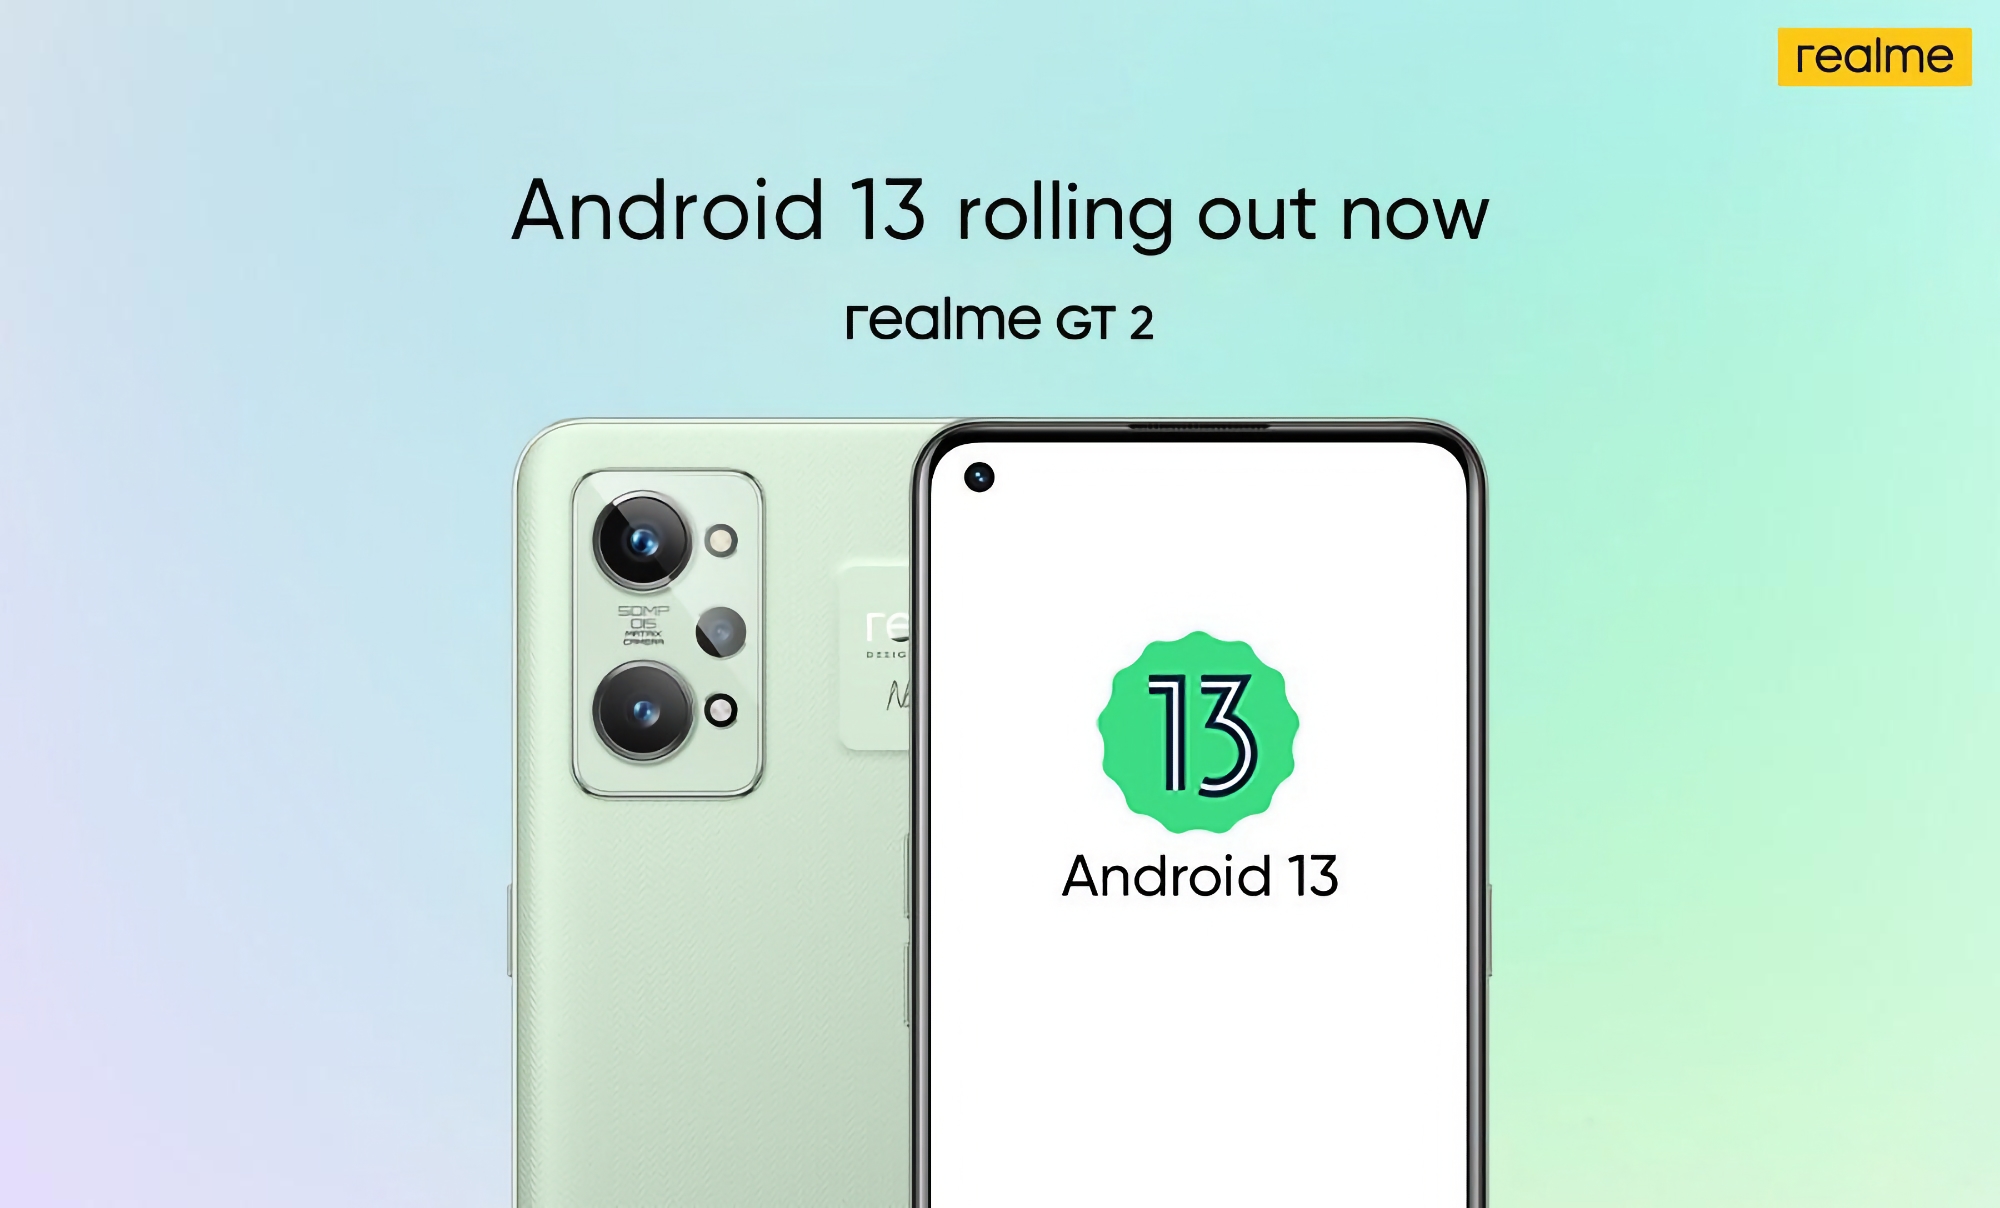 realme GT 2 began to receive a stable version of Android 13 with the shell realme UI 3.0